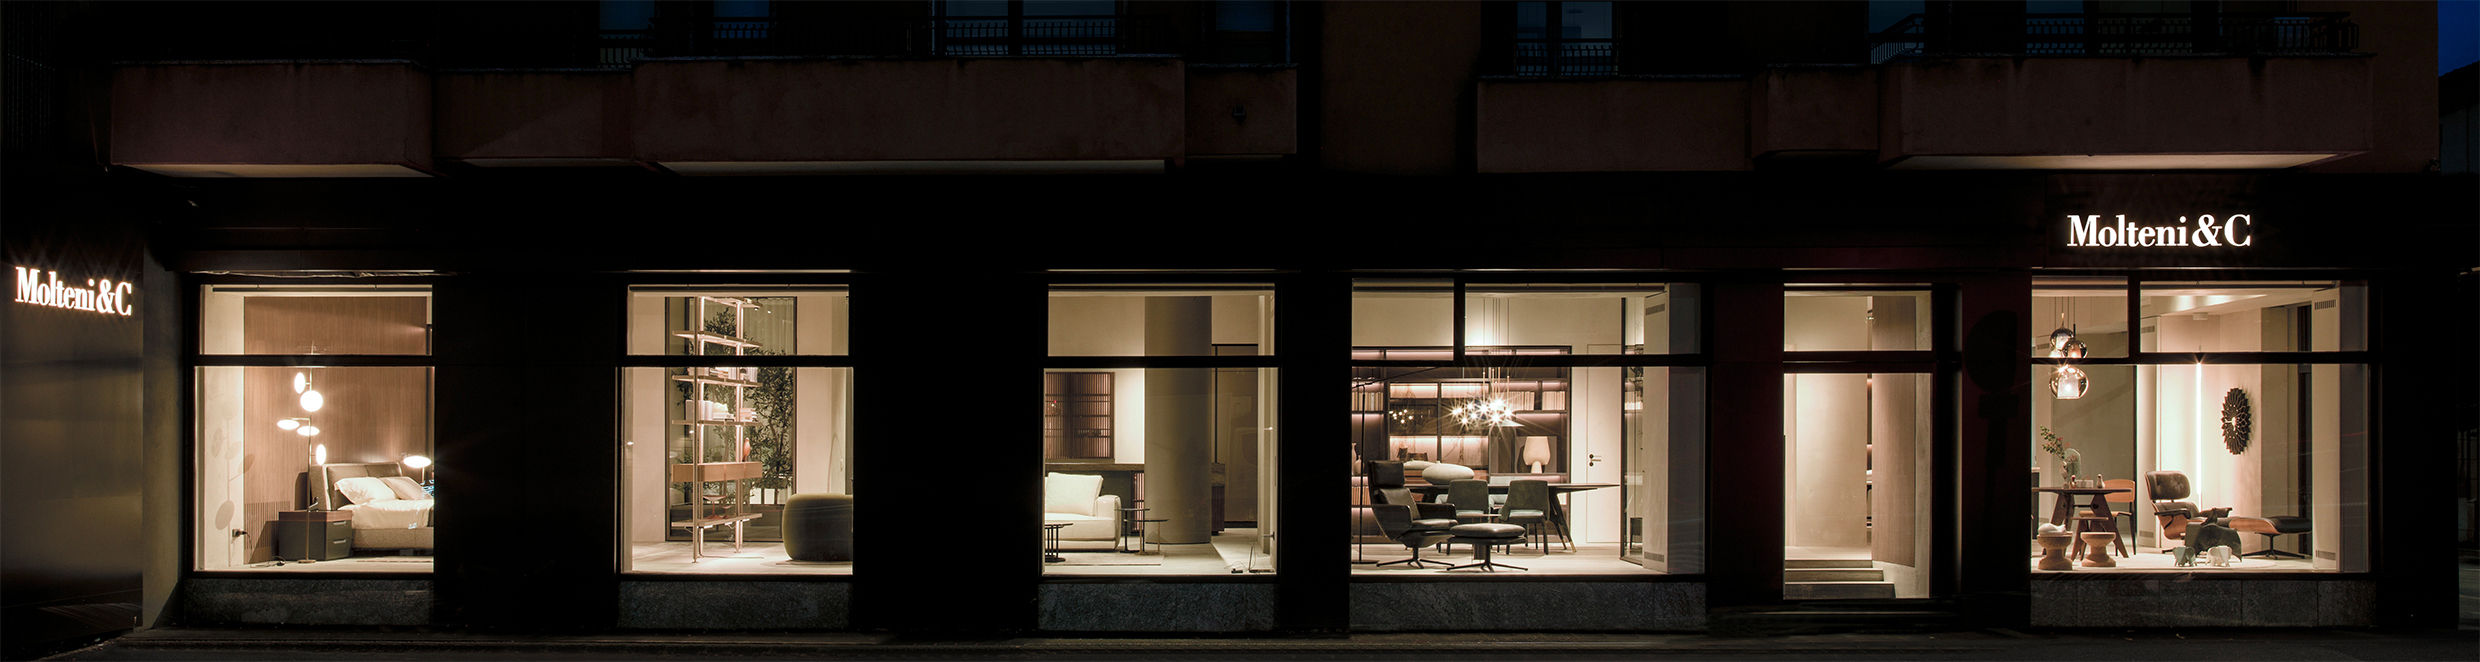 This photo shows the Molteni&C Flagship Store with Peverelli Design